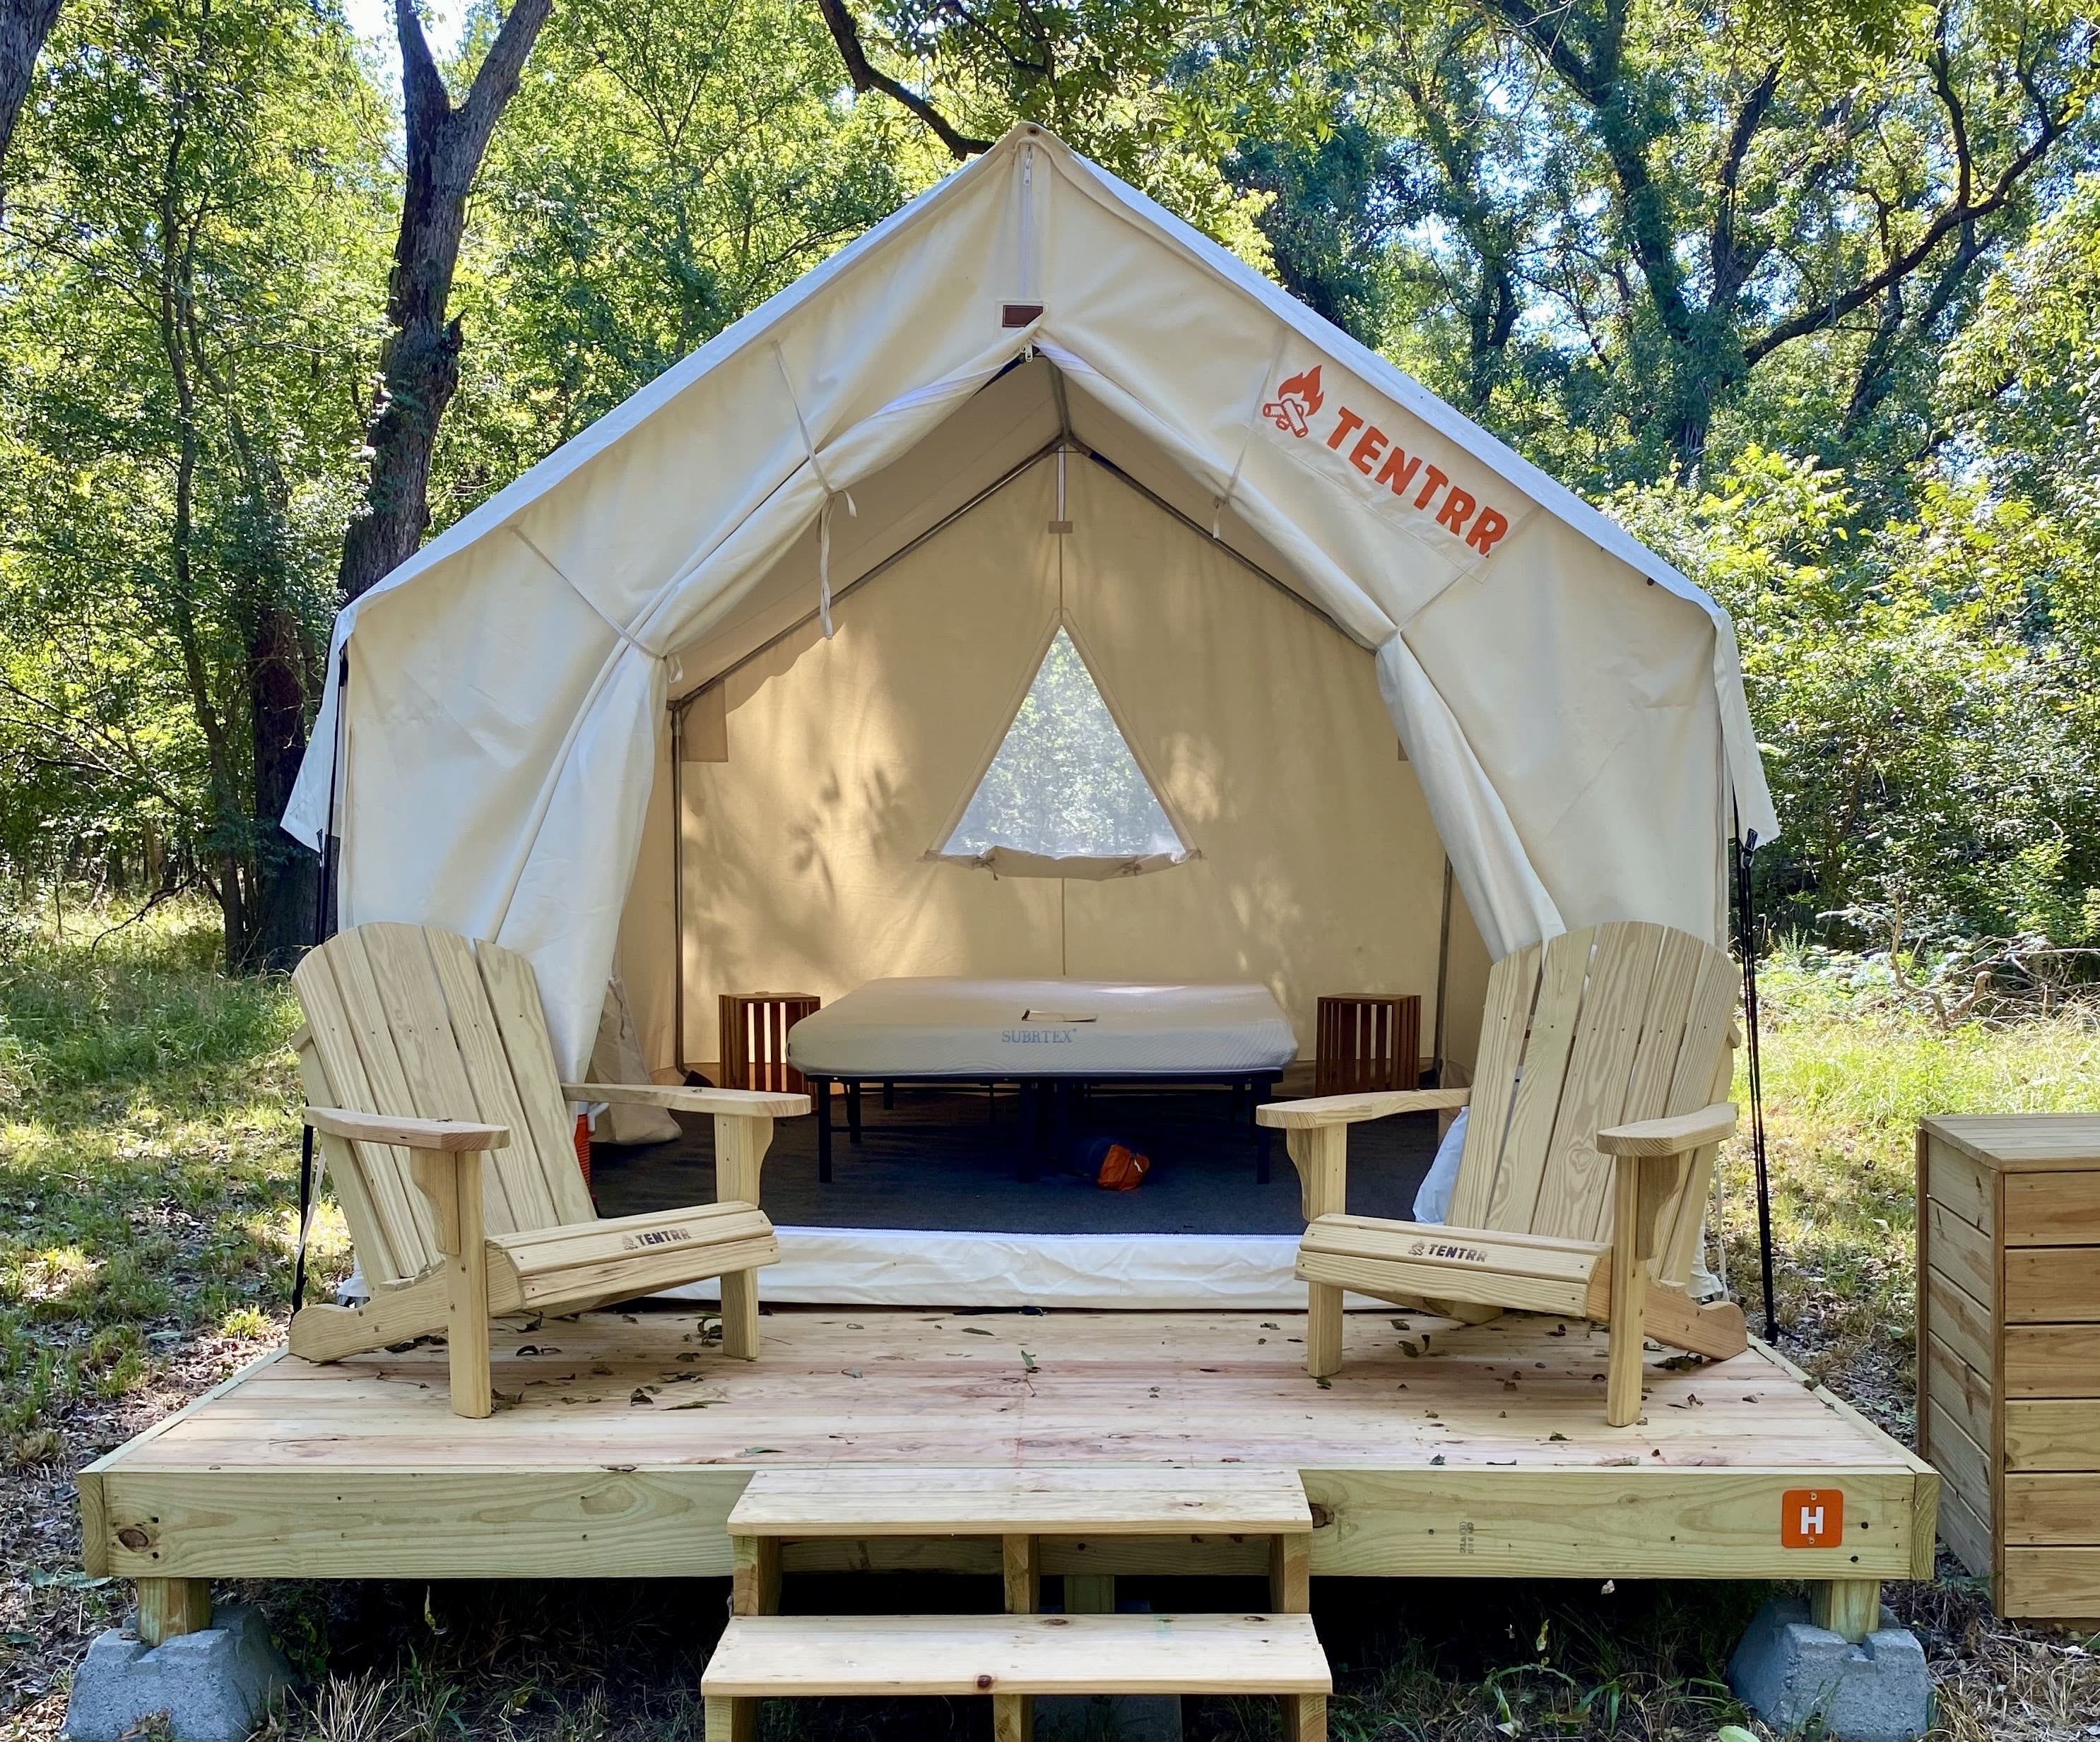 Camper submitted image from Tentrr State Park Site - Texas Brazos Bend State Park ___ Trailside H ___ Single Camp - 2